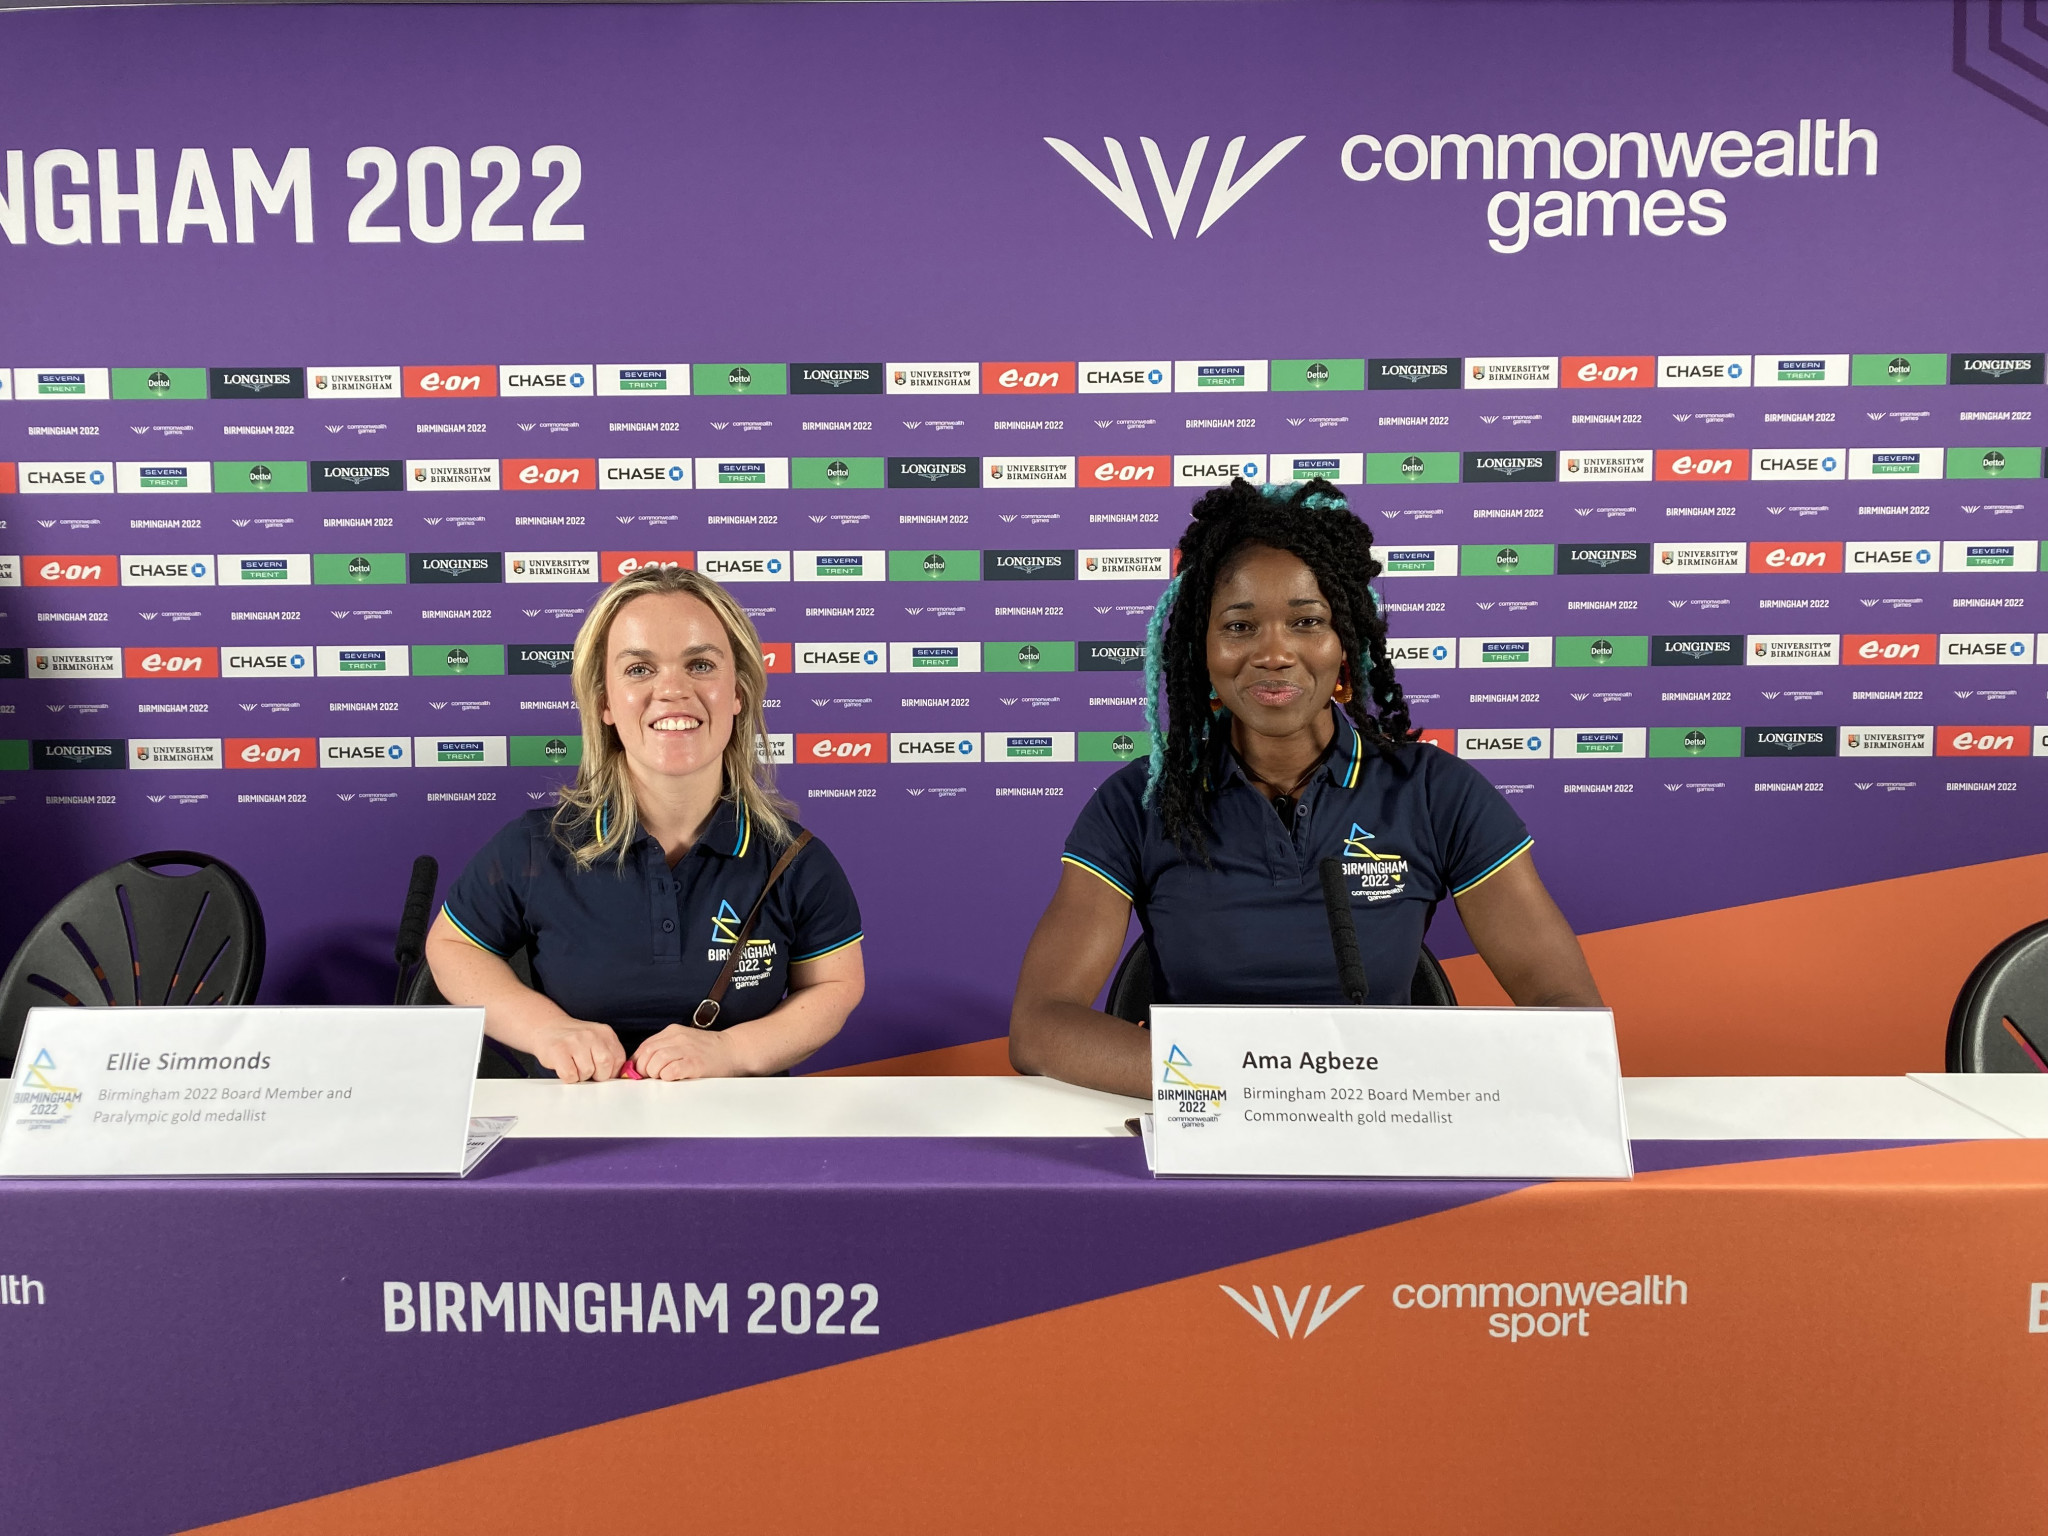 Birmingham 2022 Board members Ellie Simmonds and Ama Agbeze have backed the English city to stage the Olympics in future ©Getty Images